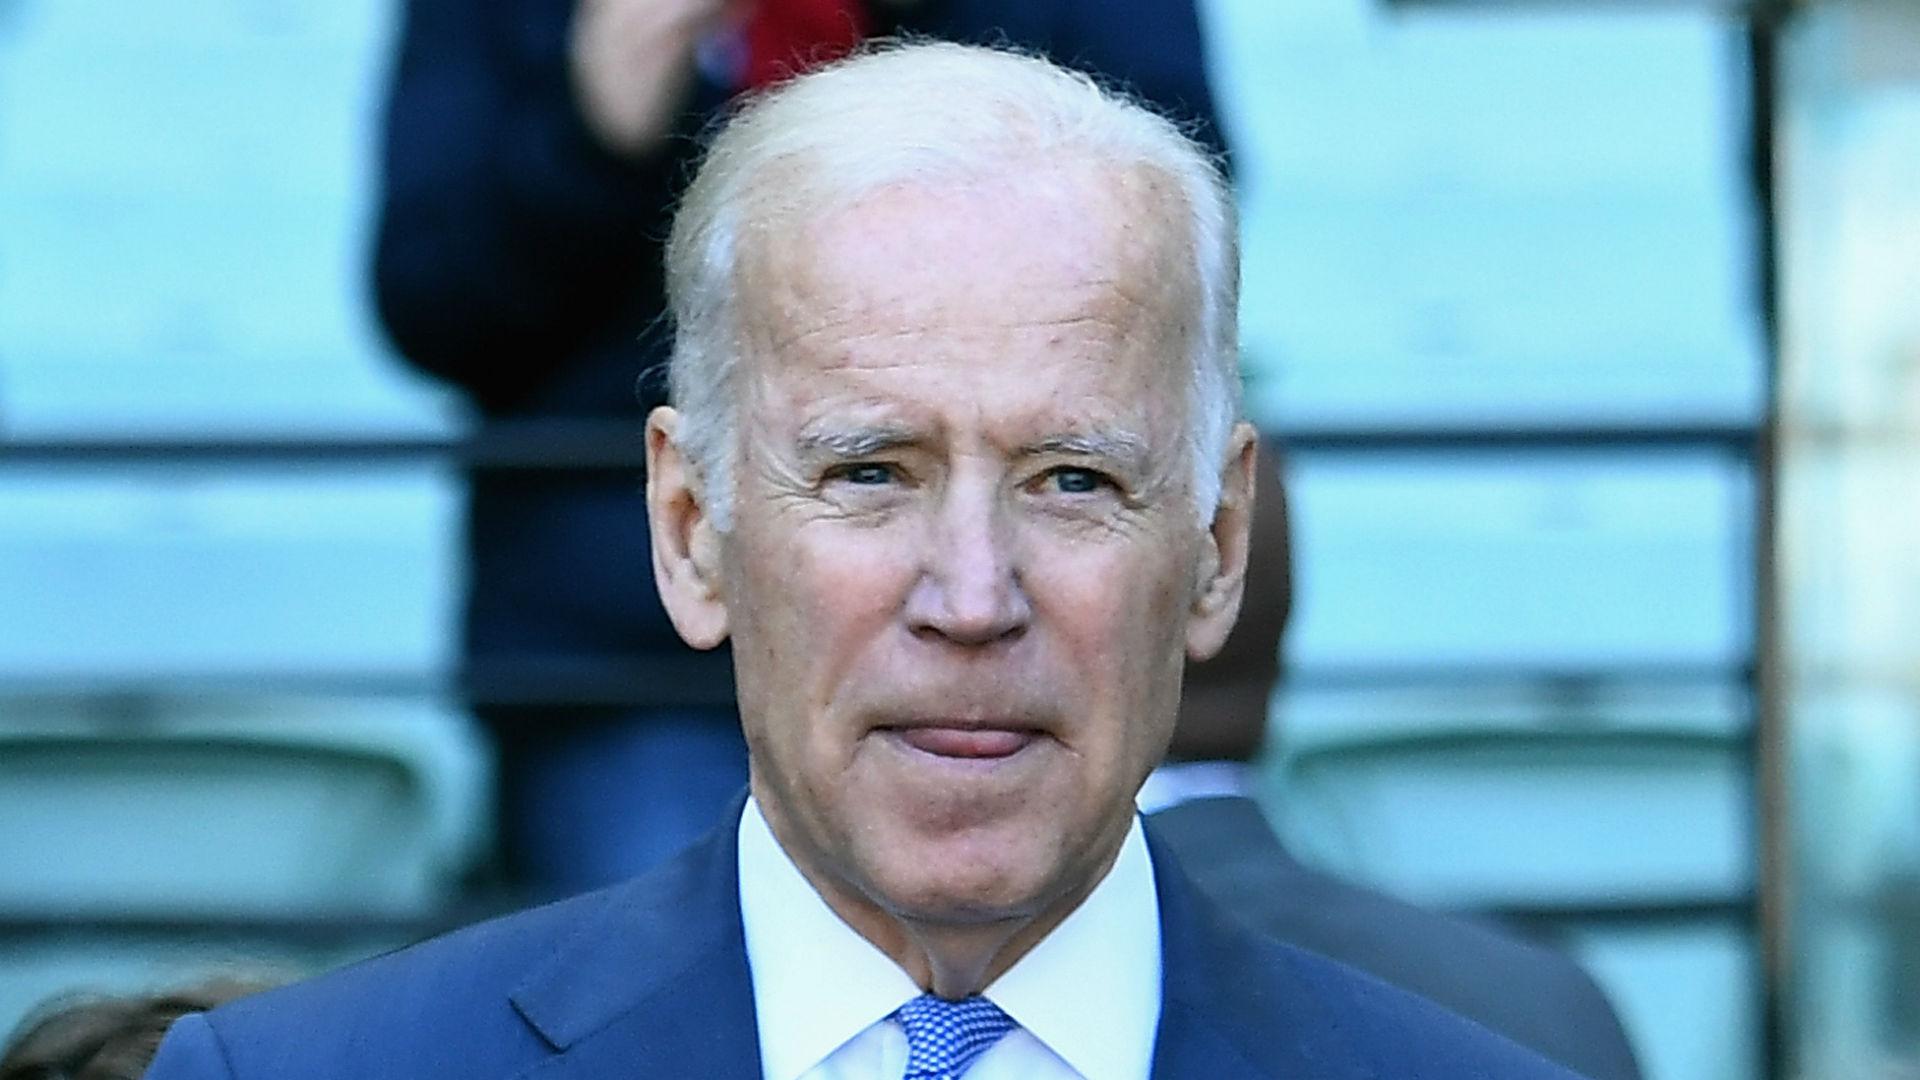 Joe biden gives us soccer ultimatum equal pay or no world cup funding sporting news canada